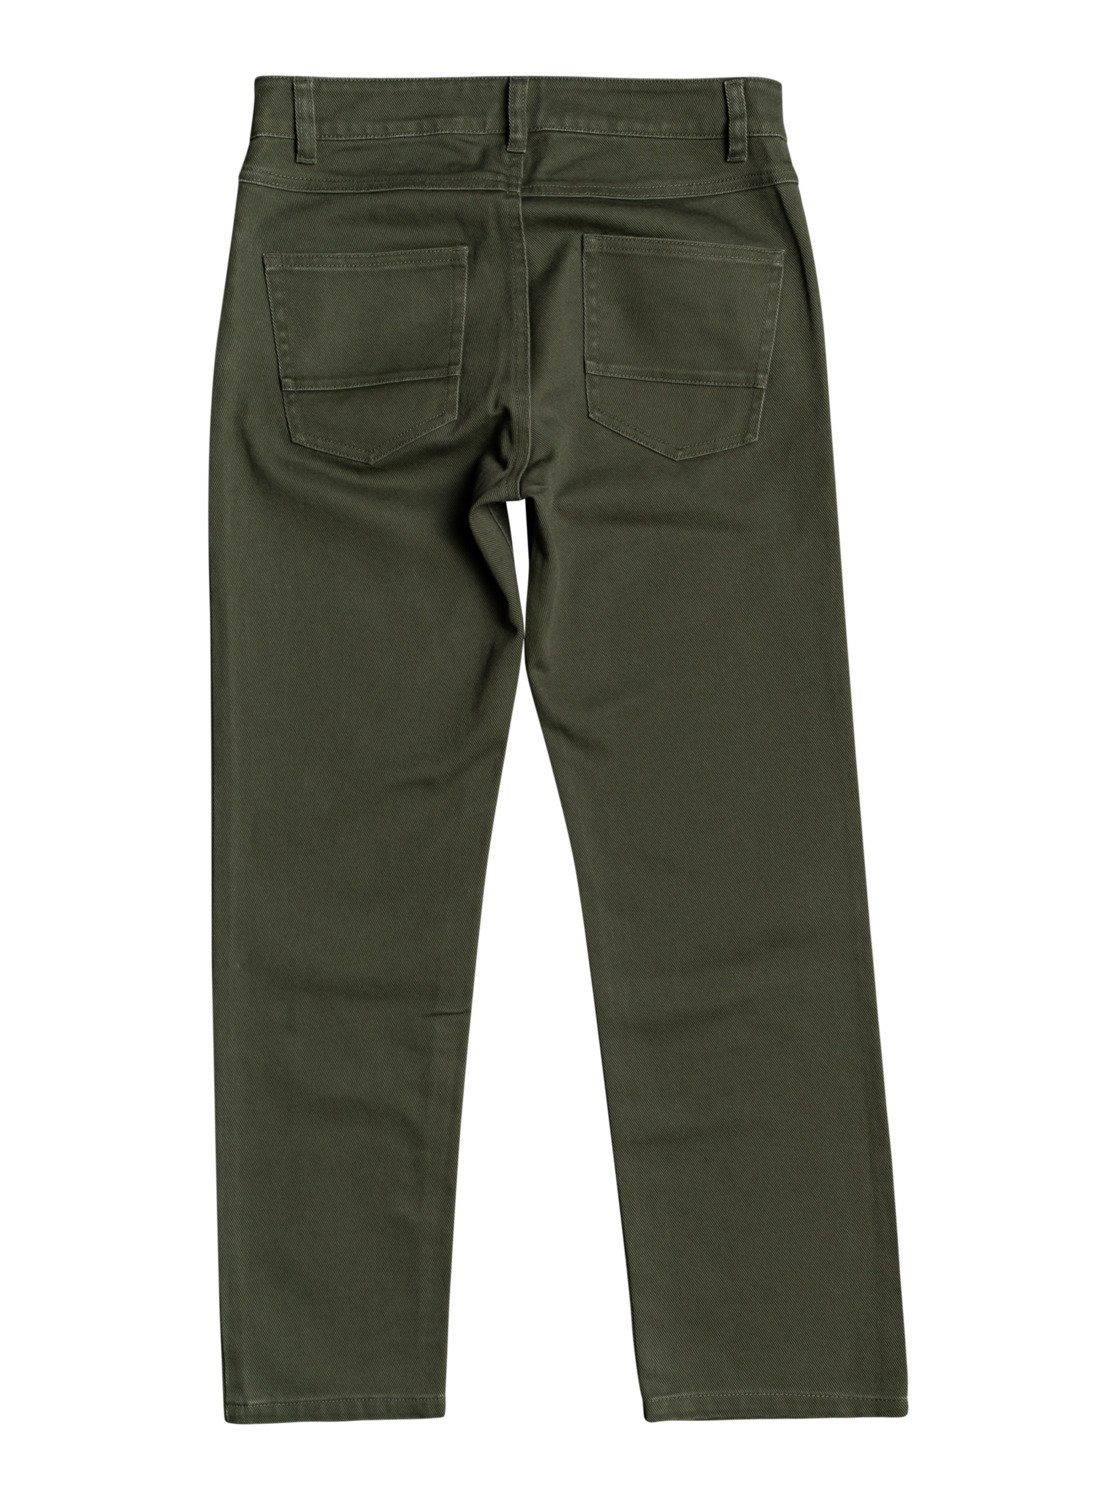 Quiksilver Firefly Stoffhose